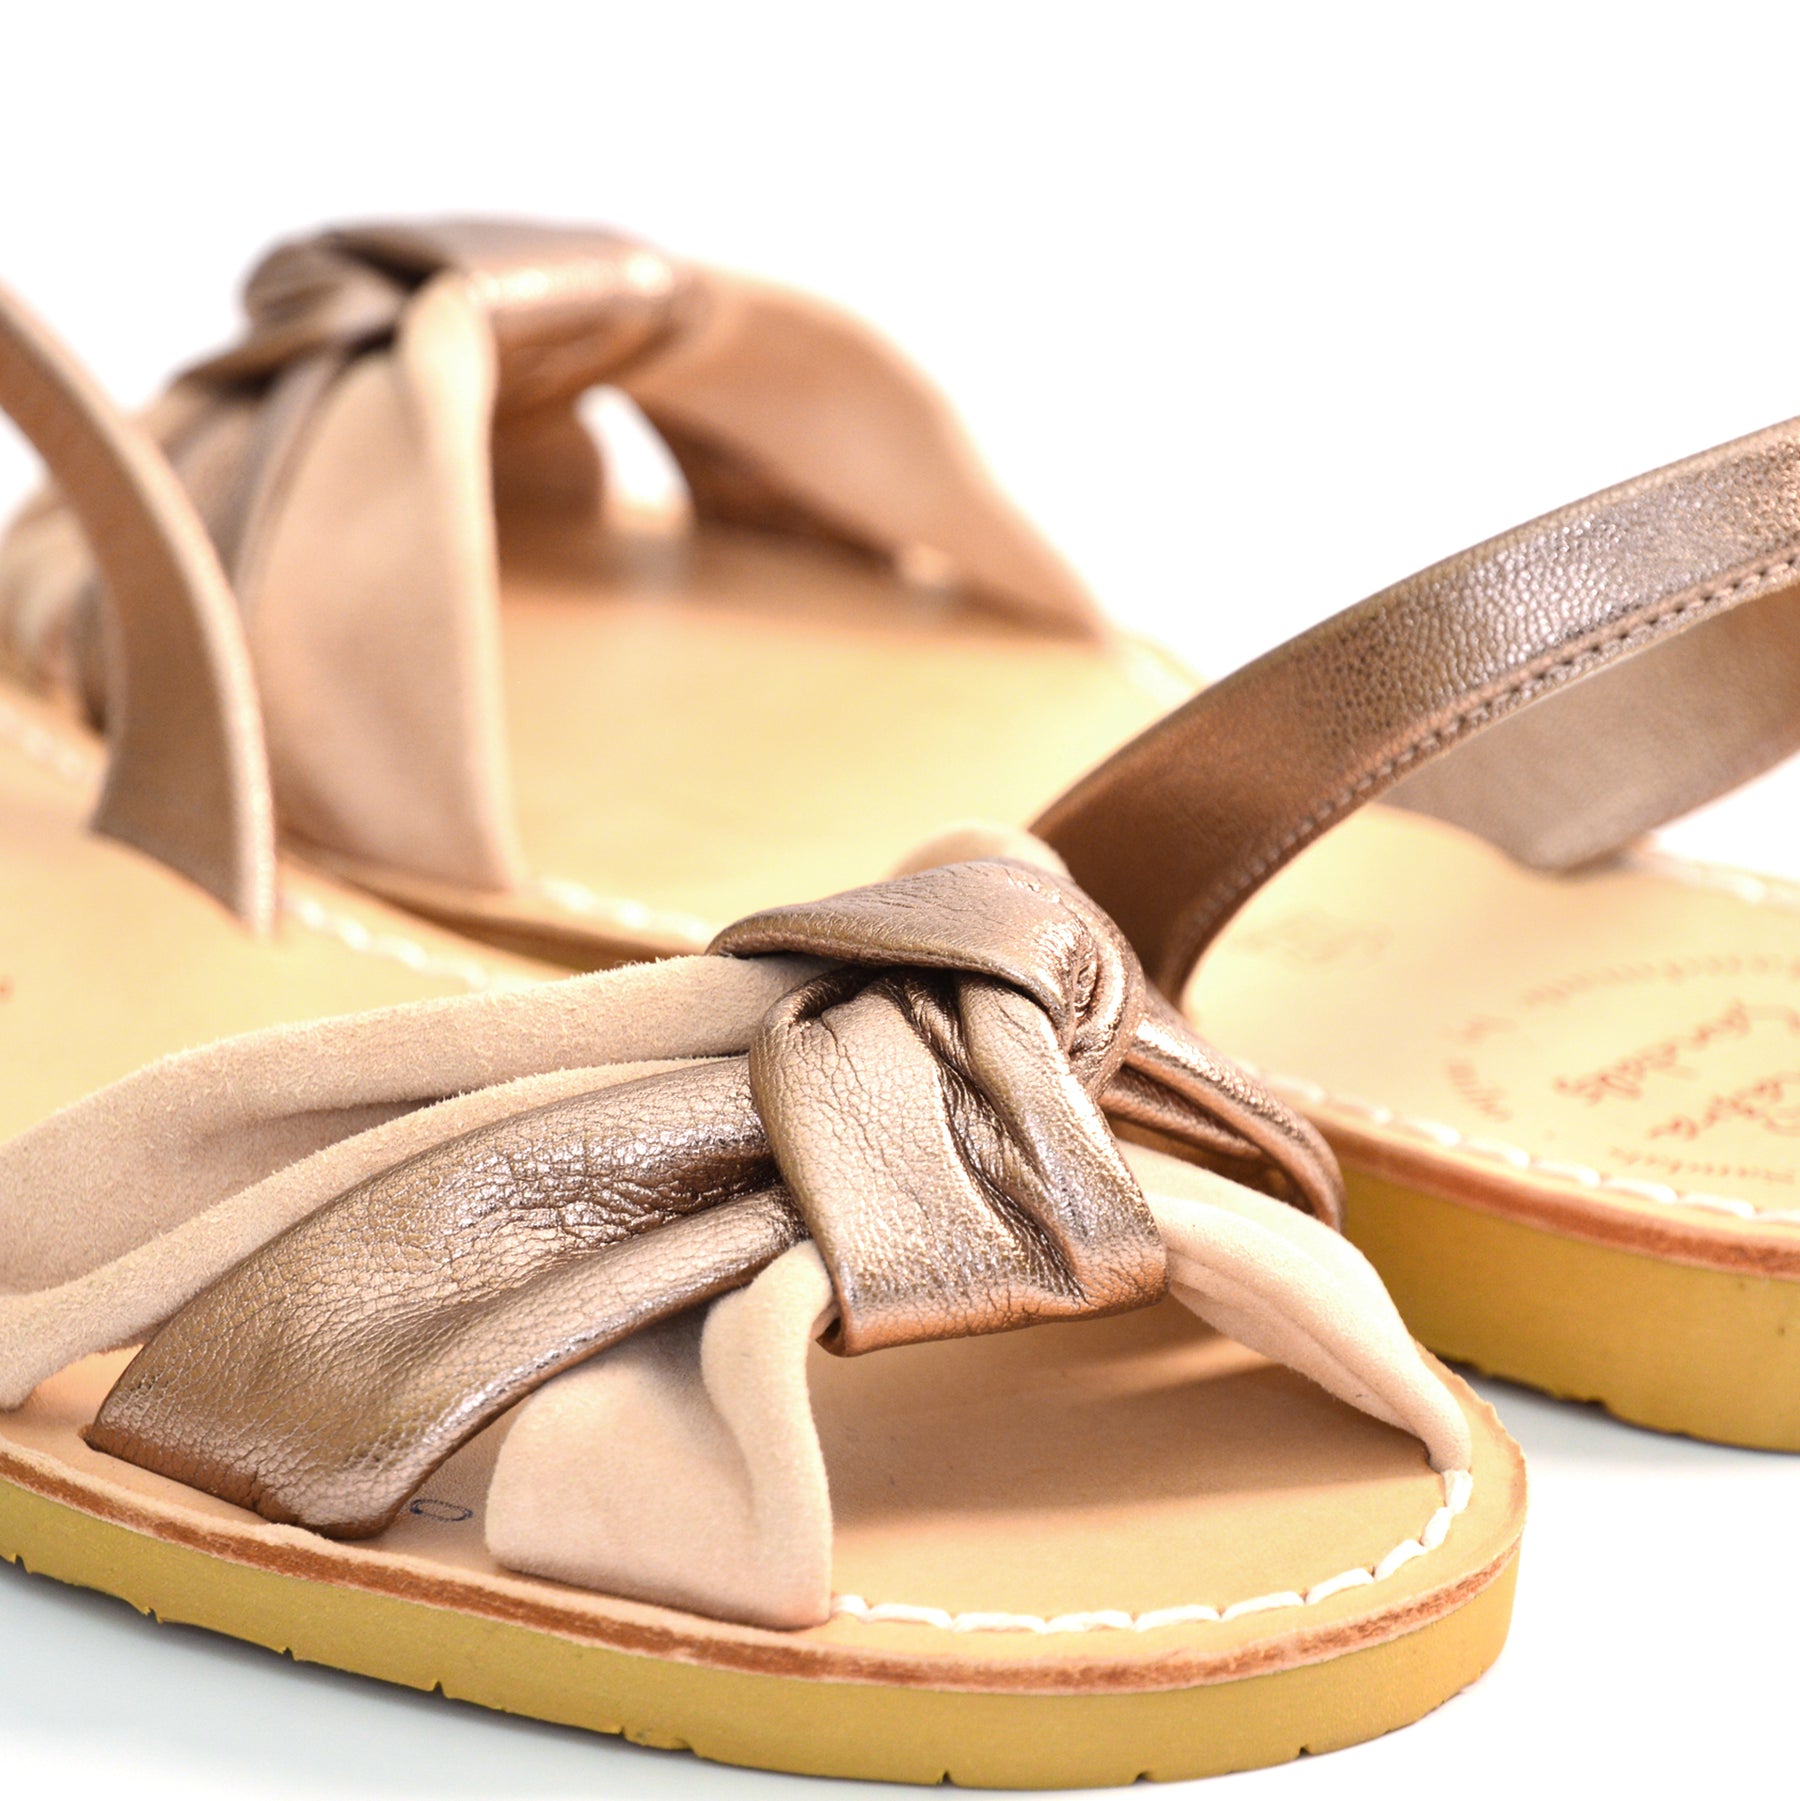 pale pink suede and metallic leather knotted peeptoe avarca sandals with flexible rubber sole and slingback.